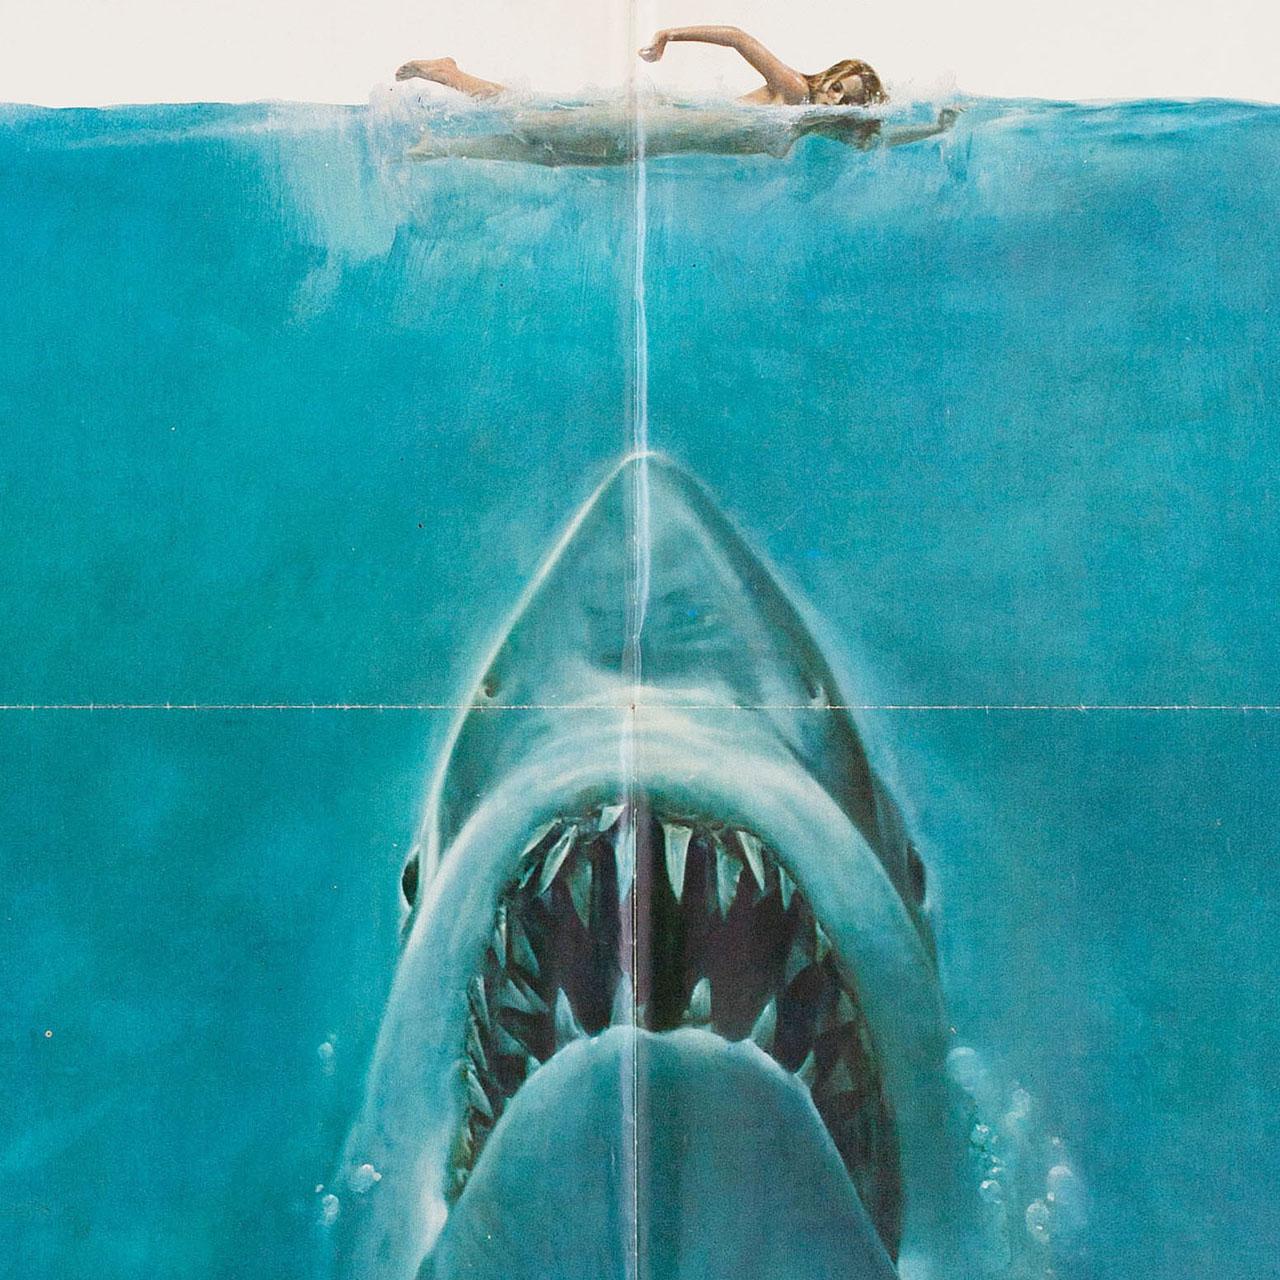 Original 1975 U.S. one sheet poster by Roger Kastel / Tony Seiniger for the 1975 film Jaws directed by Steven Spielberg with Roy Scheider and Robert Shaw. Very good-fine condition, folded with pinholes. Many original posters were issued folded or